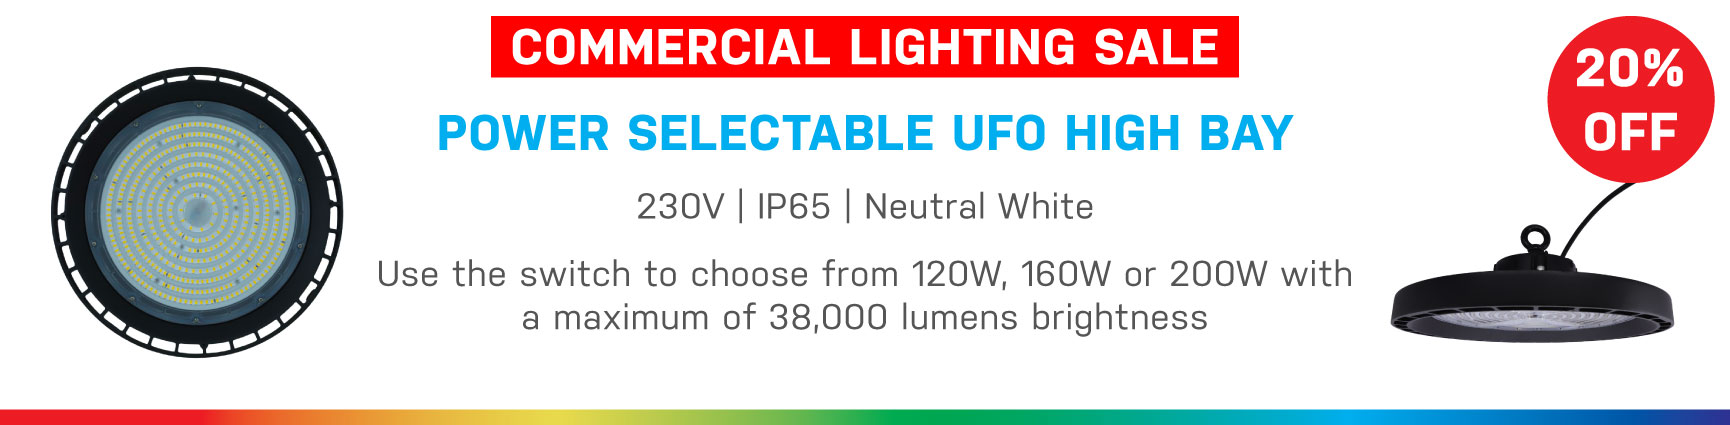 20% Off Power-Selectable UFO High Bay Light